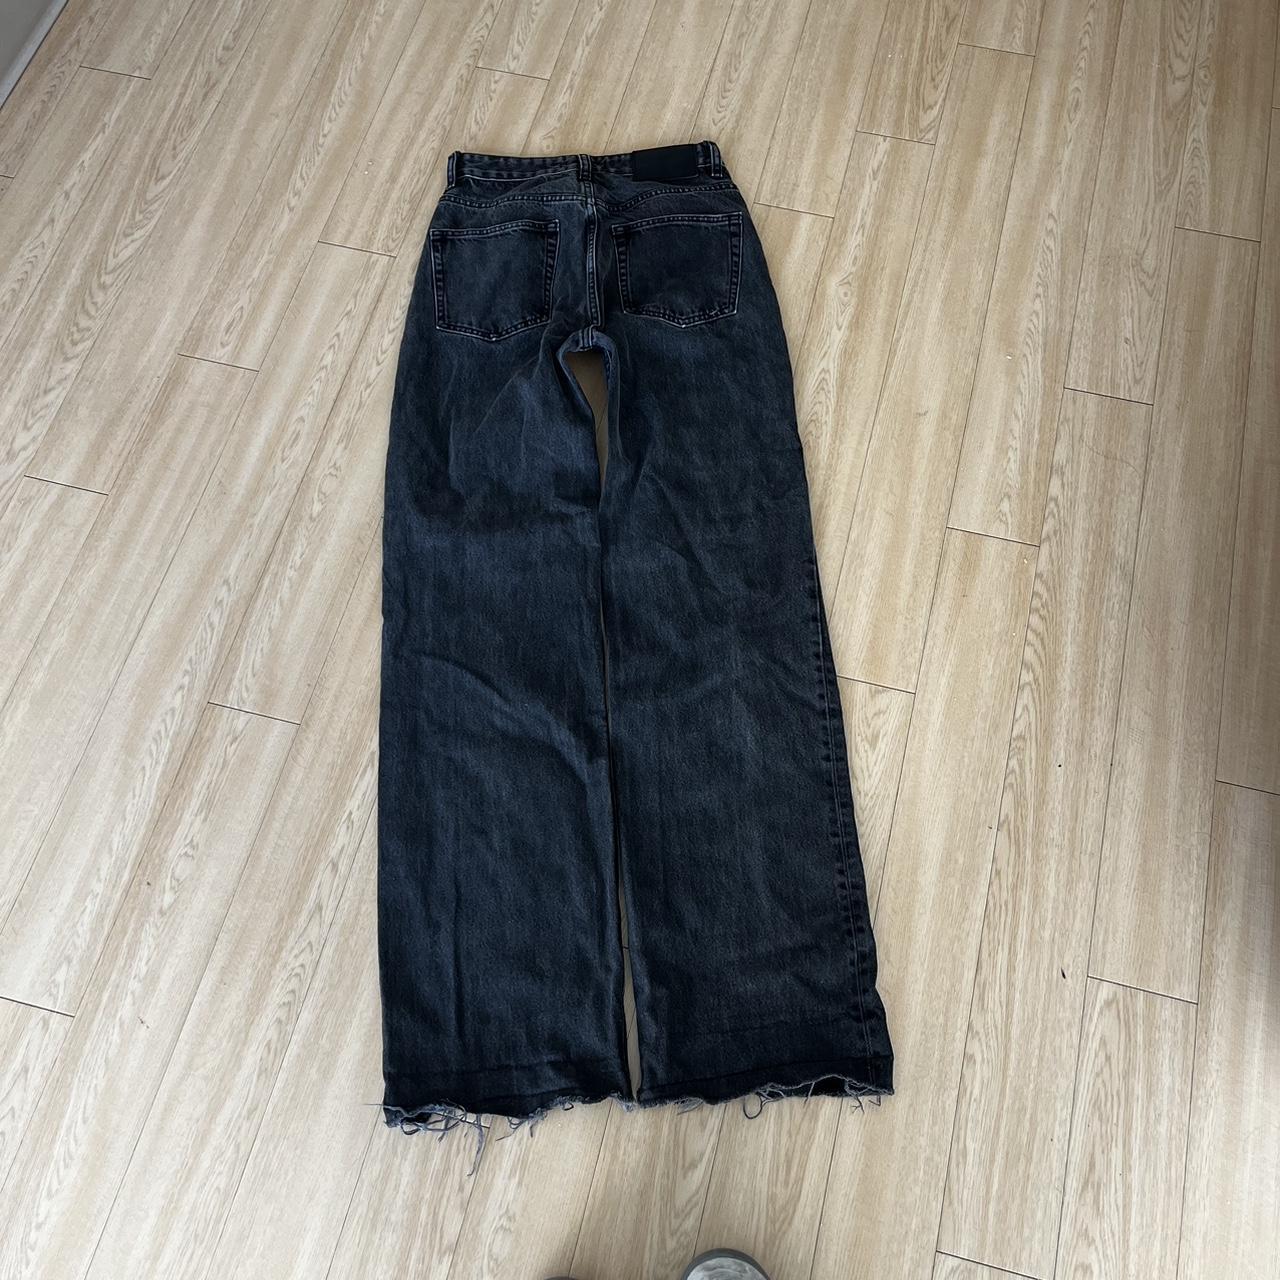 Pull&Bear Women's Black and Grey Jeans (2)